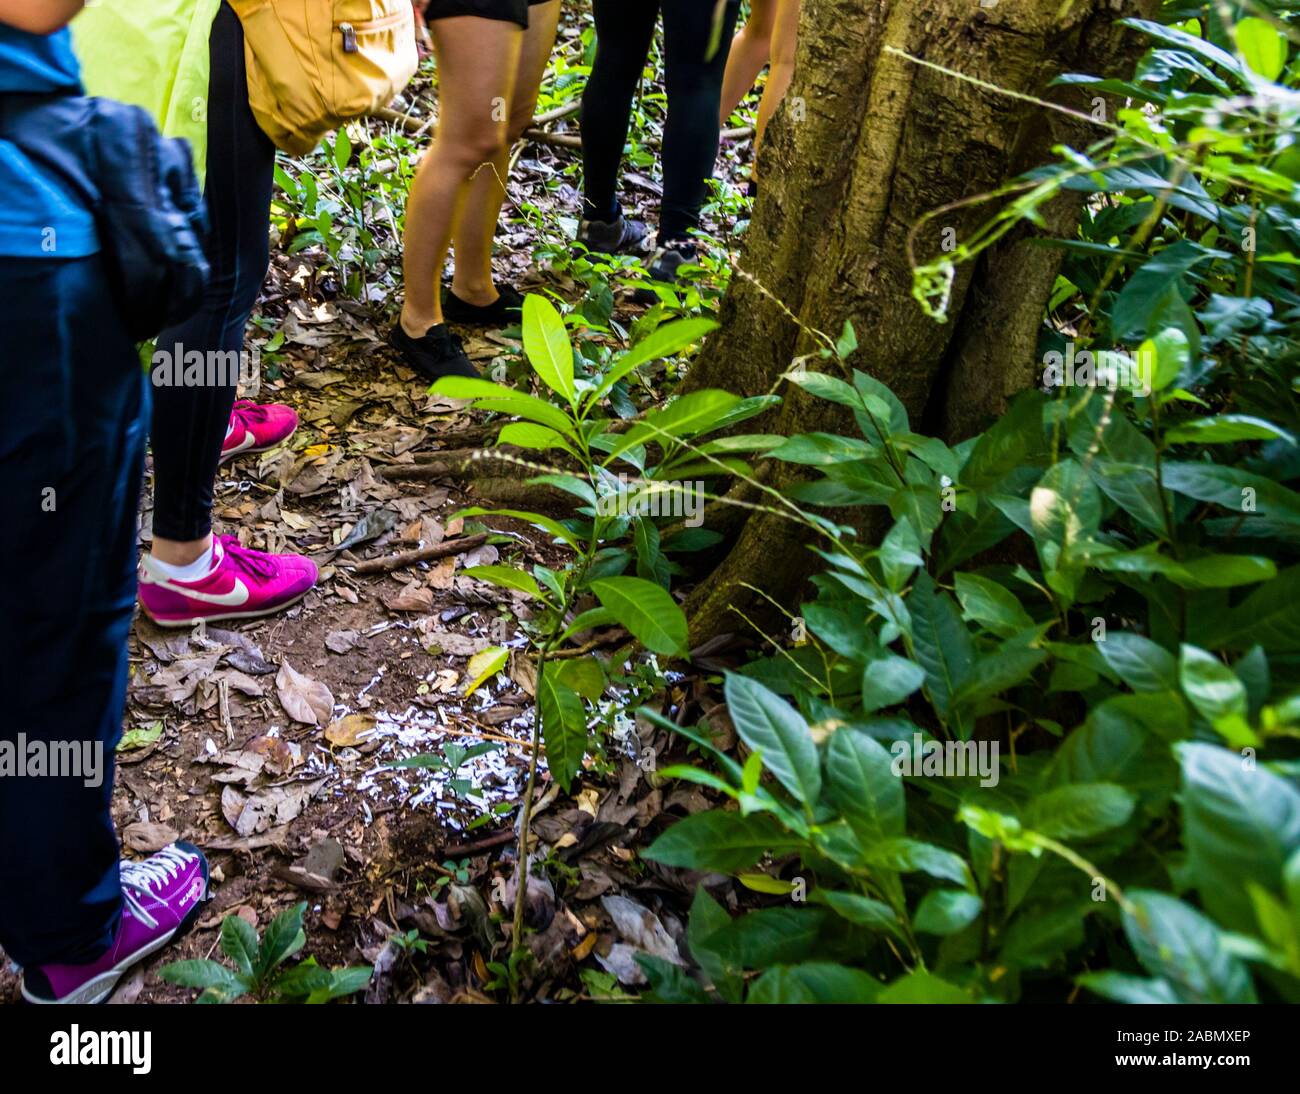 Hash House Harriers Running Event in Happy Hill, Grenada Stock Photo